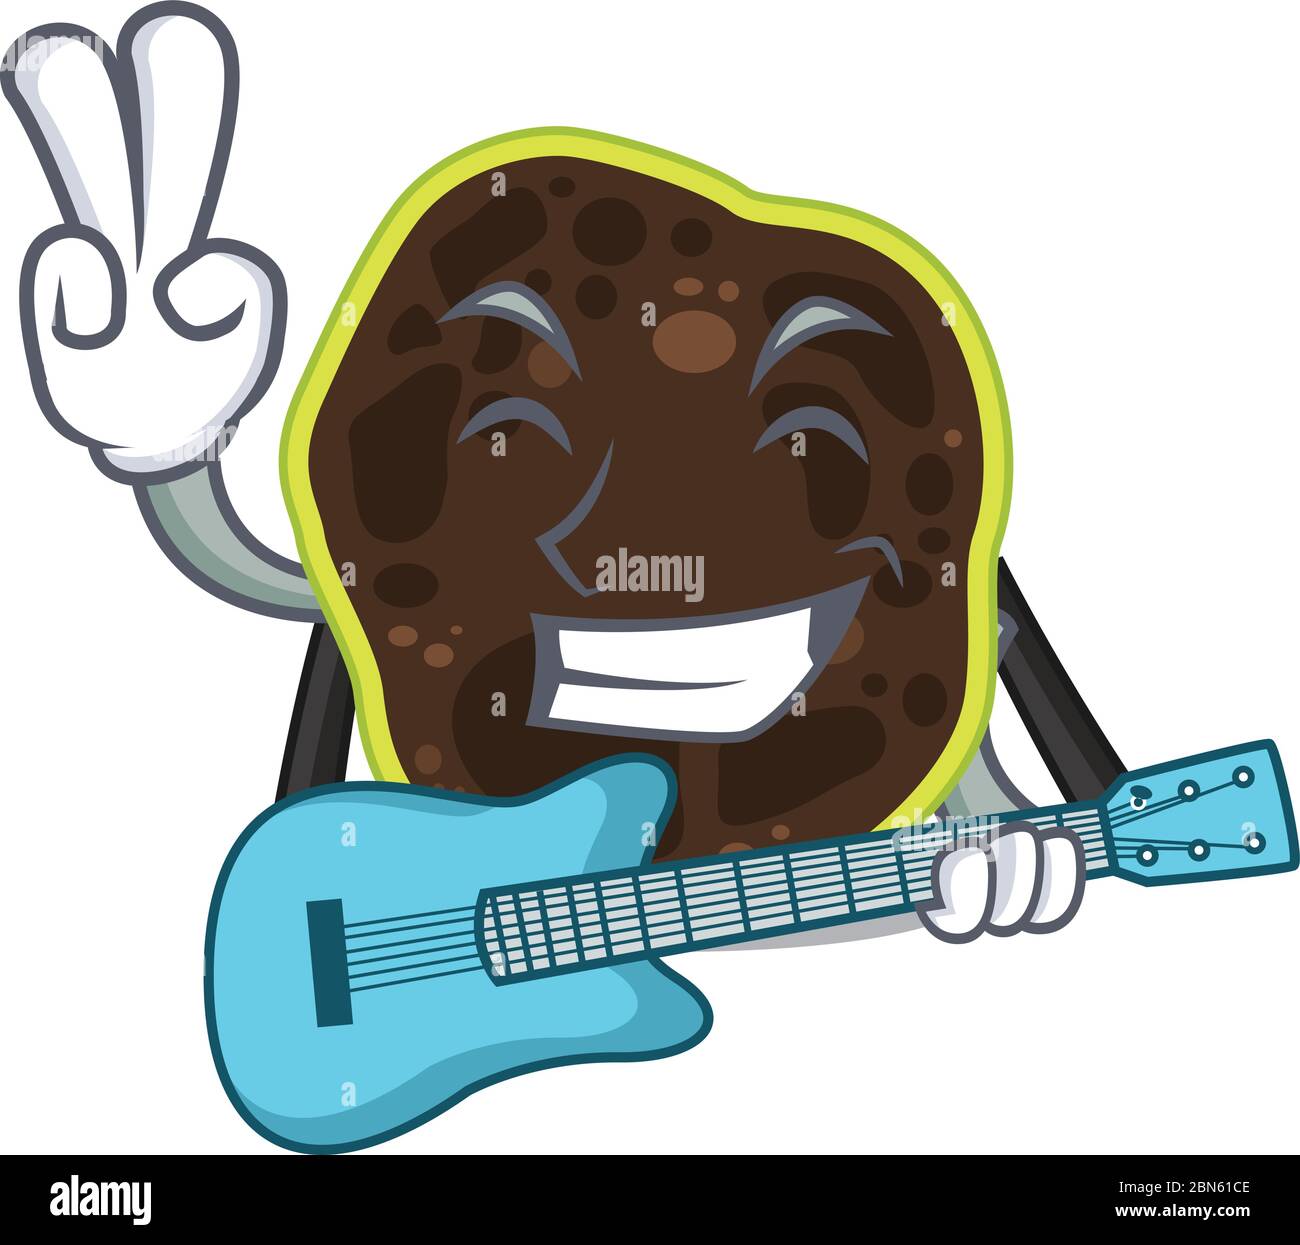 brilliant musician of firmicutes cartoon design playing music with a guitar Stock Vector